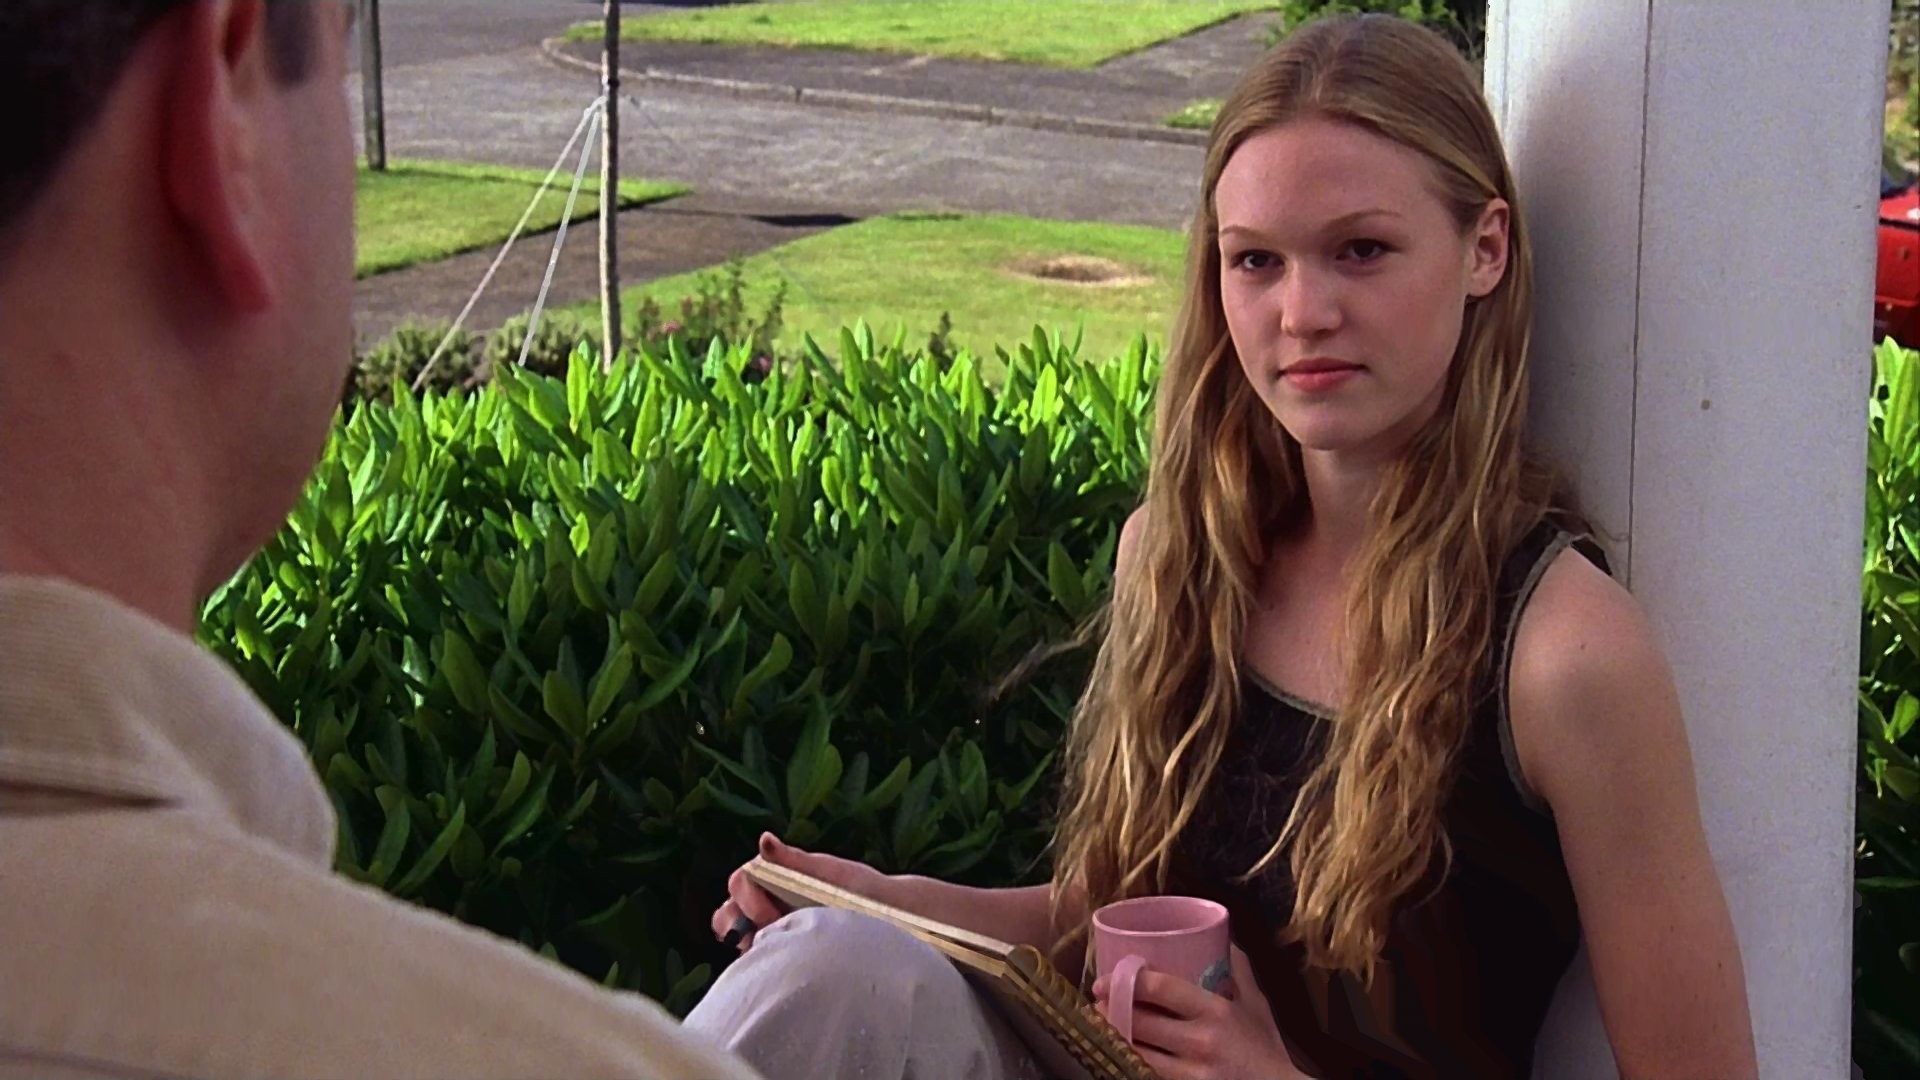 10 Things I Hate About You (1999) | FilmFed - Movies, Ratings, Reviews ...